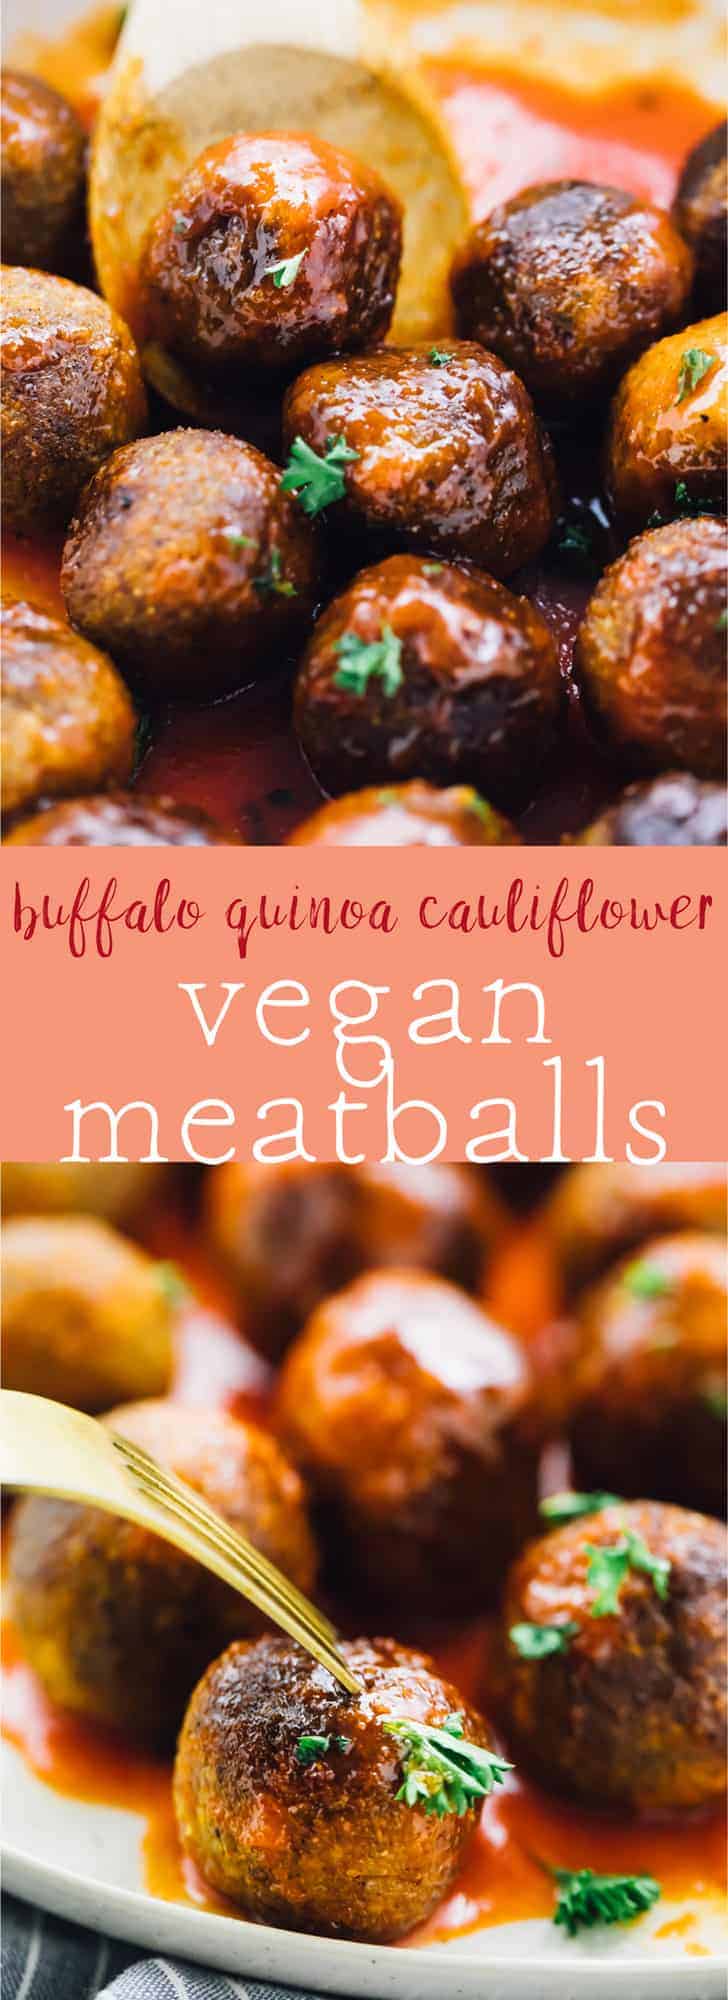 These Buffalo Quinoa Cauliflower Vegan Meatballs will be a HIT at your next party! They are incredibly easy to make, coated in buffalo sauce and so meal preppable! via https://jessicainthekitchen.com